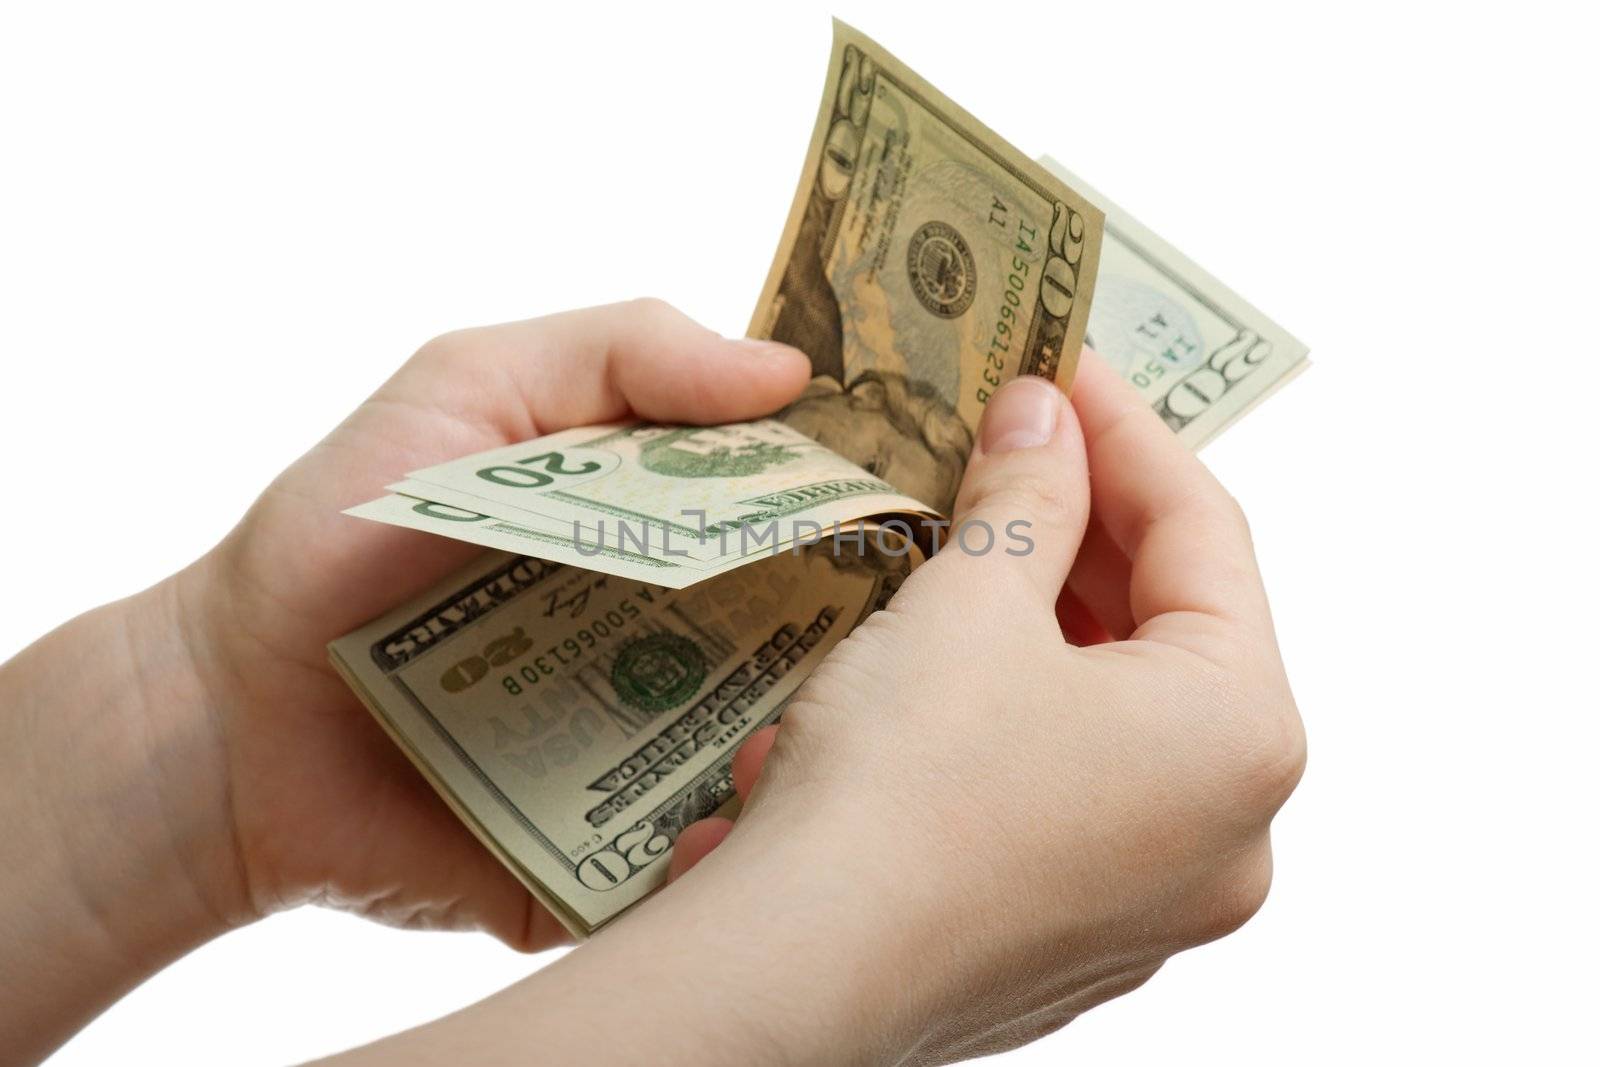 Finance wealth human hand holding dollar currency